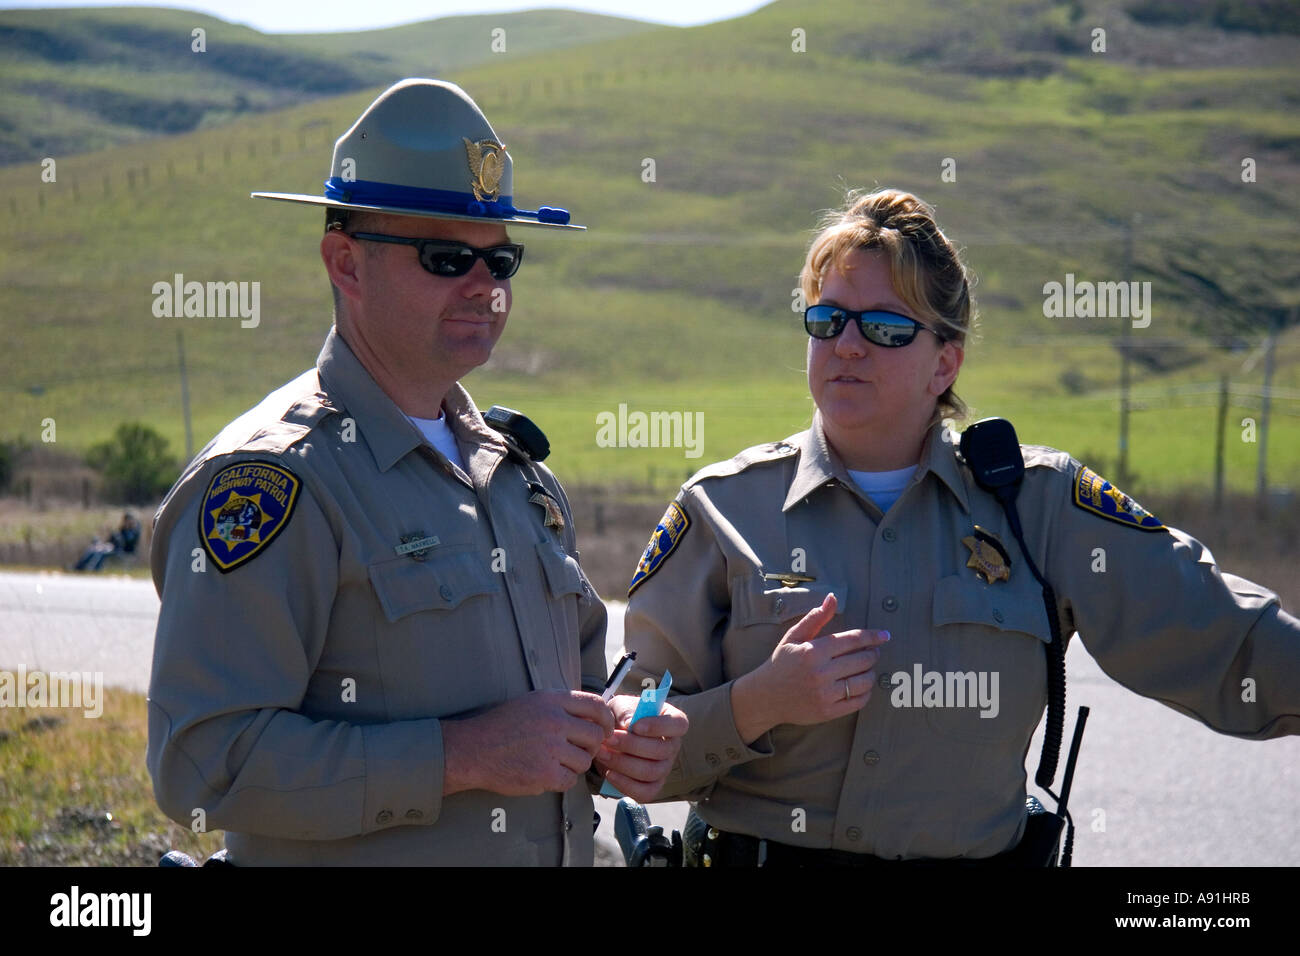 Male and female California highway patrol officers. Stock Photo